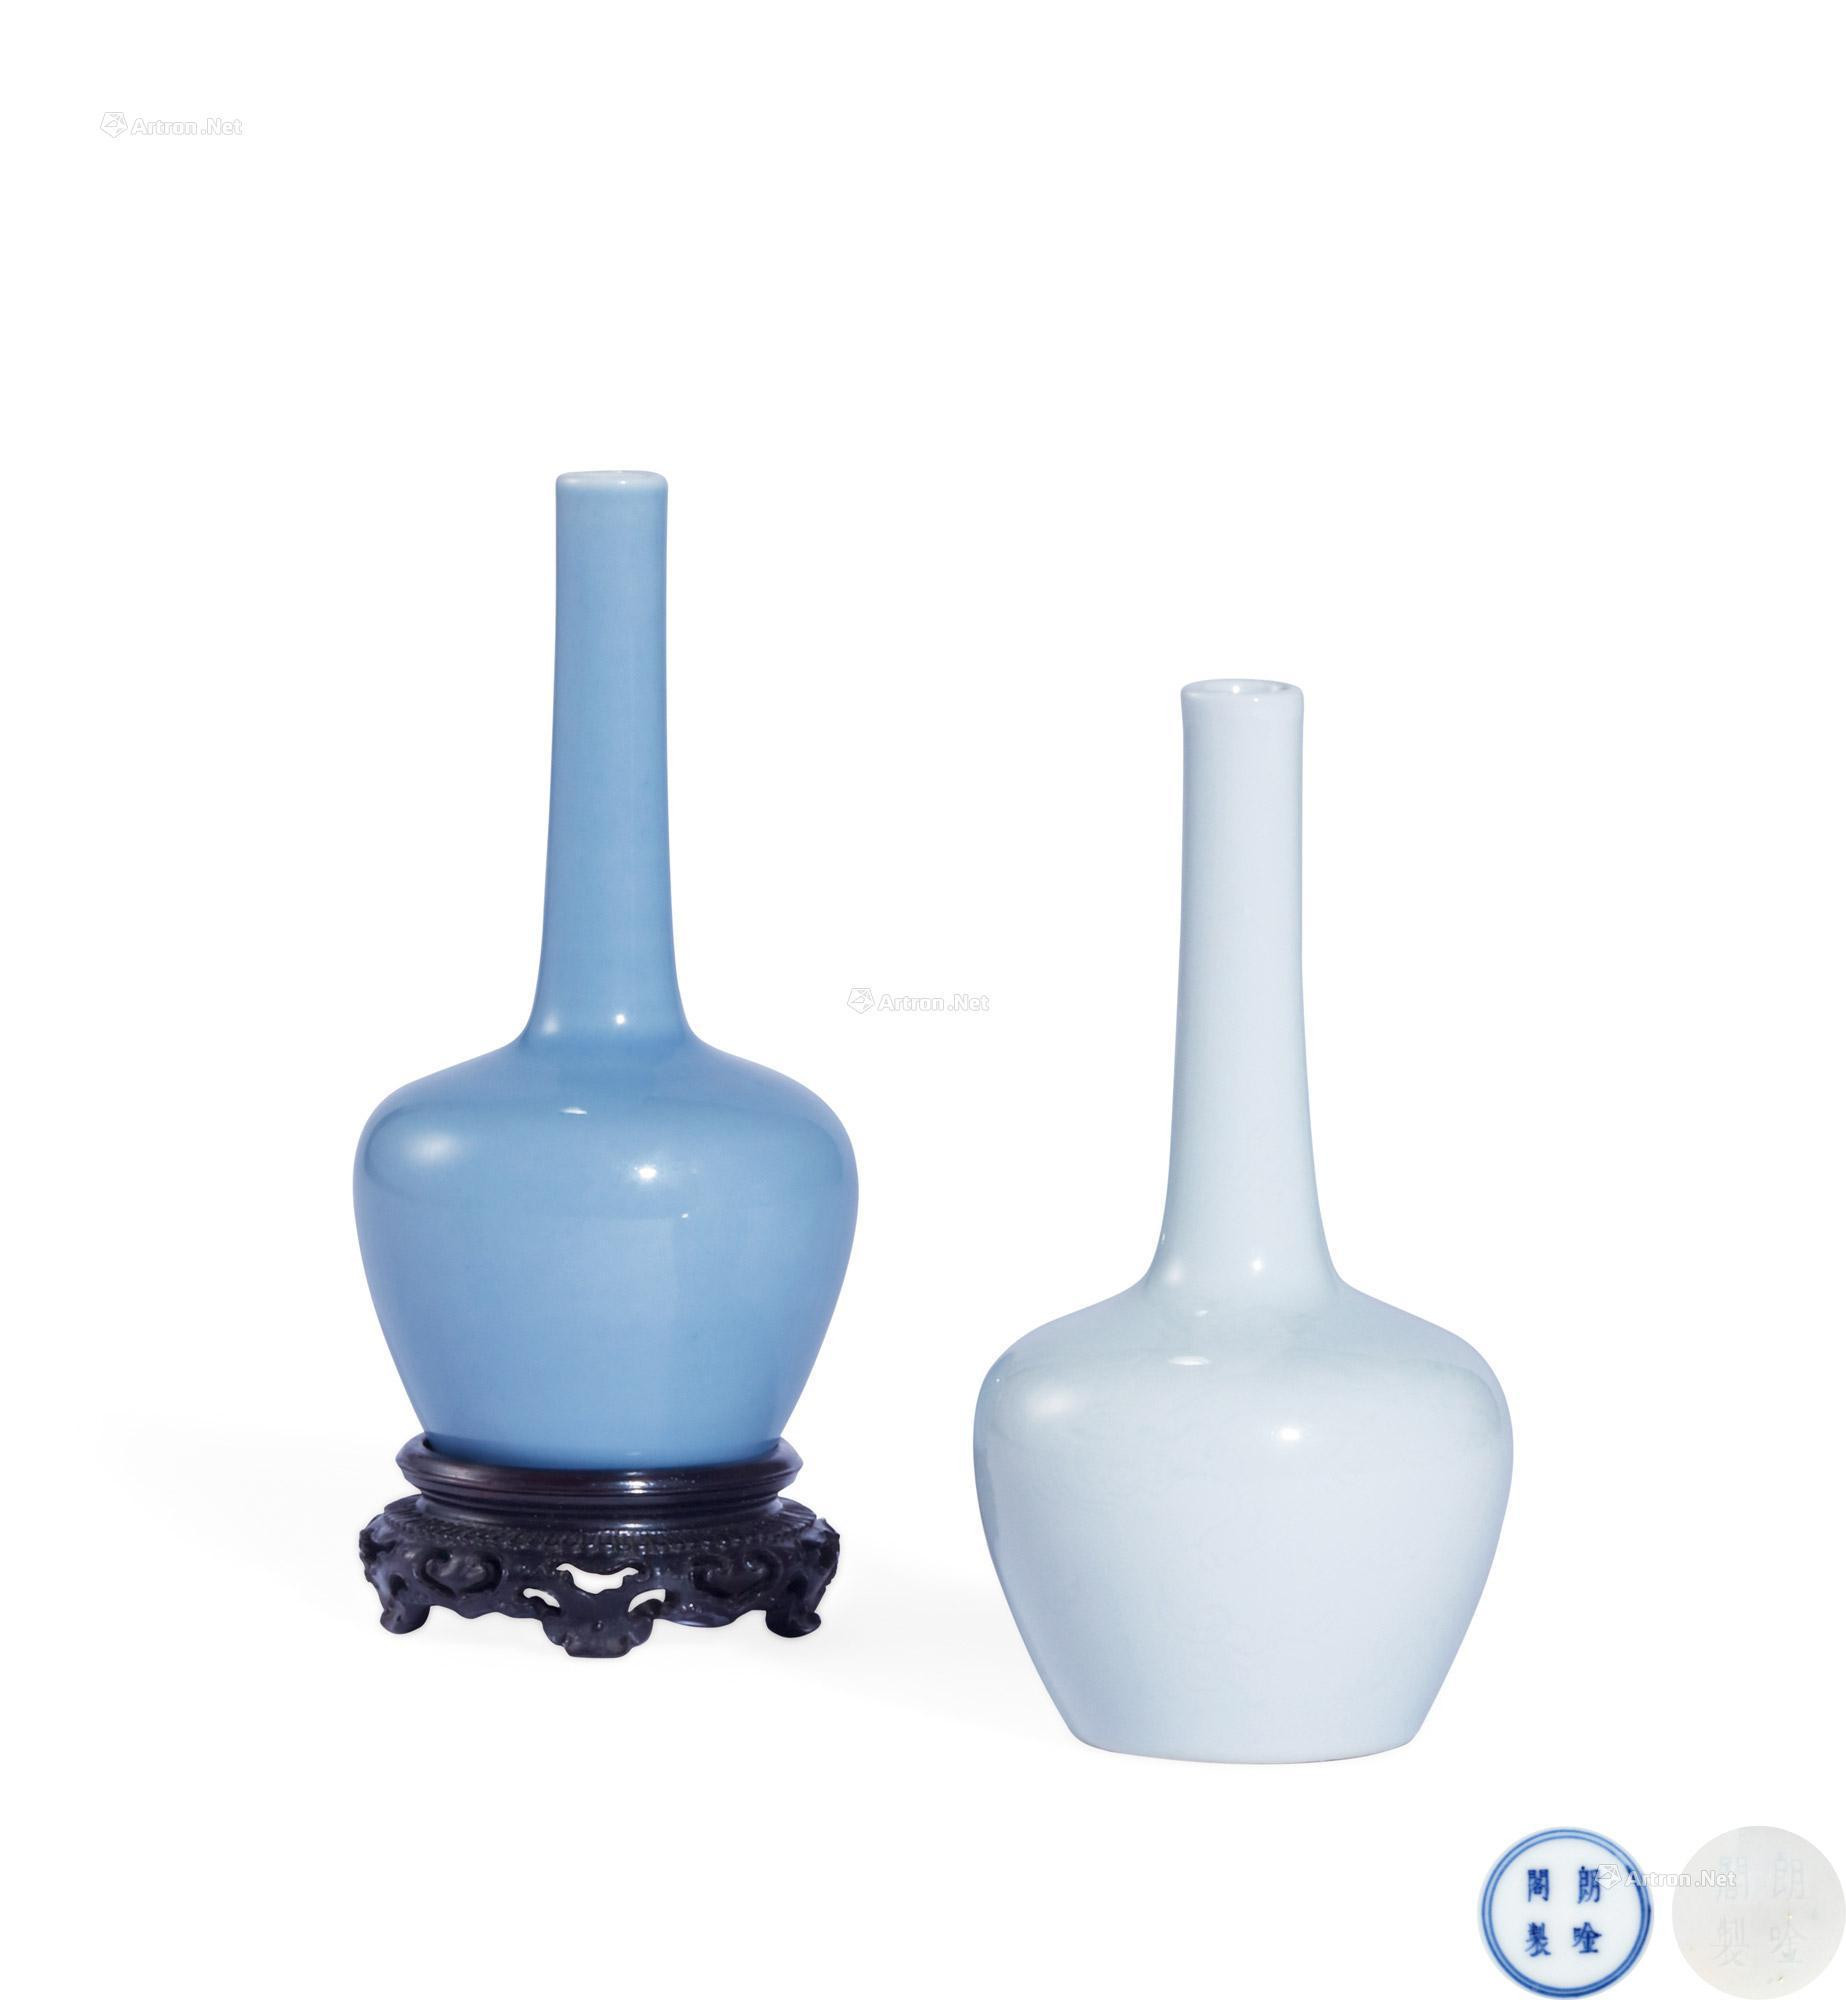 TWO CLAIR-DE-LUNE-GLAZED AND WHITE-GLAZED BOTTLE VASES FOR PRINCE YINZHEN WITH HALLMARK “LANG YIN GE”